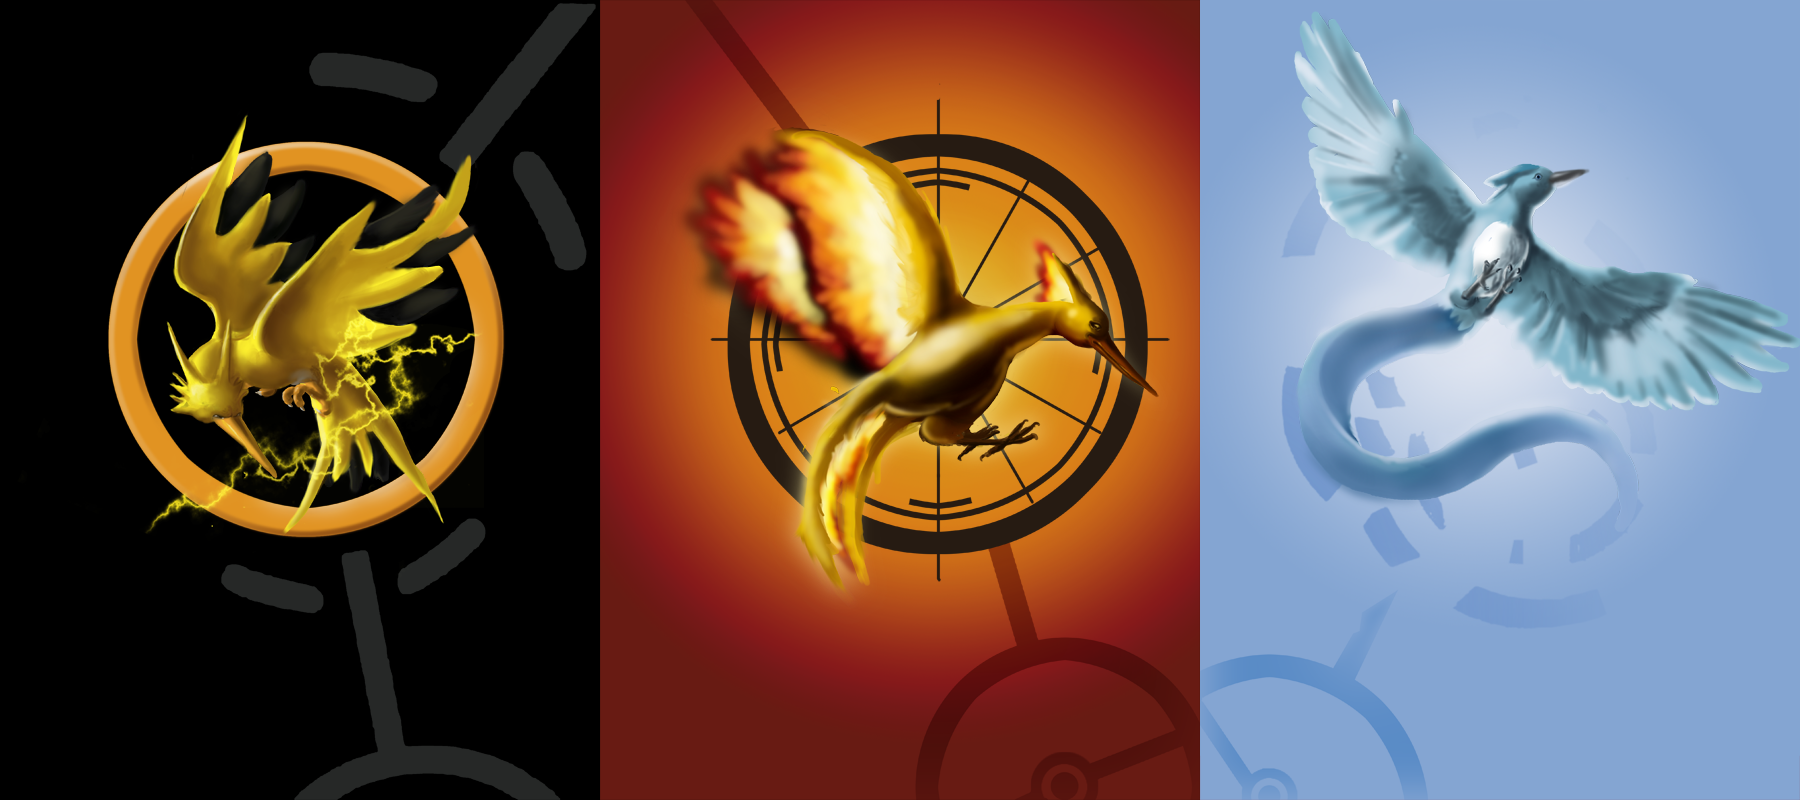 hunger_games_birds_by_typoedheart-d57ksh6.png